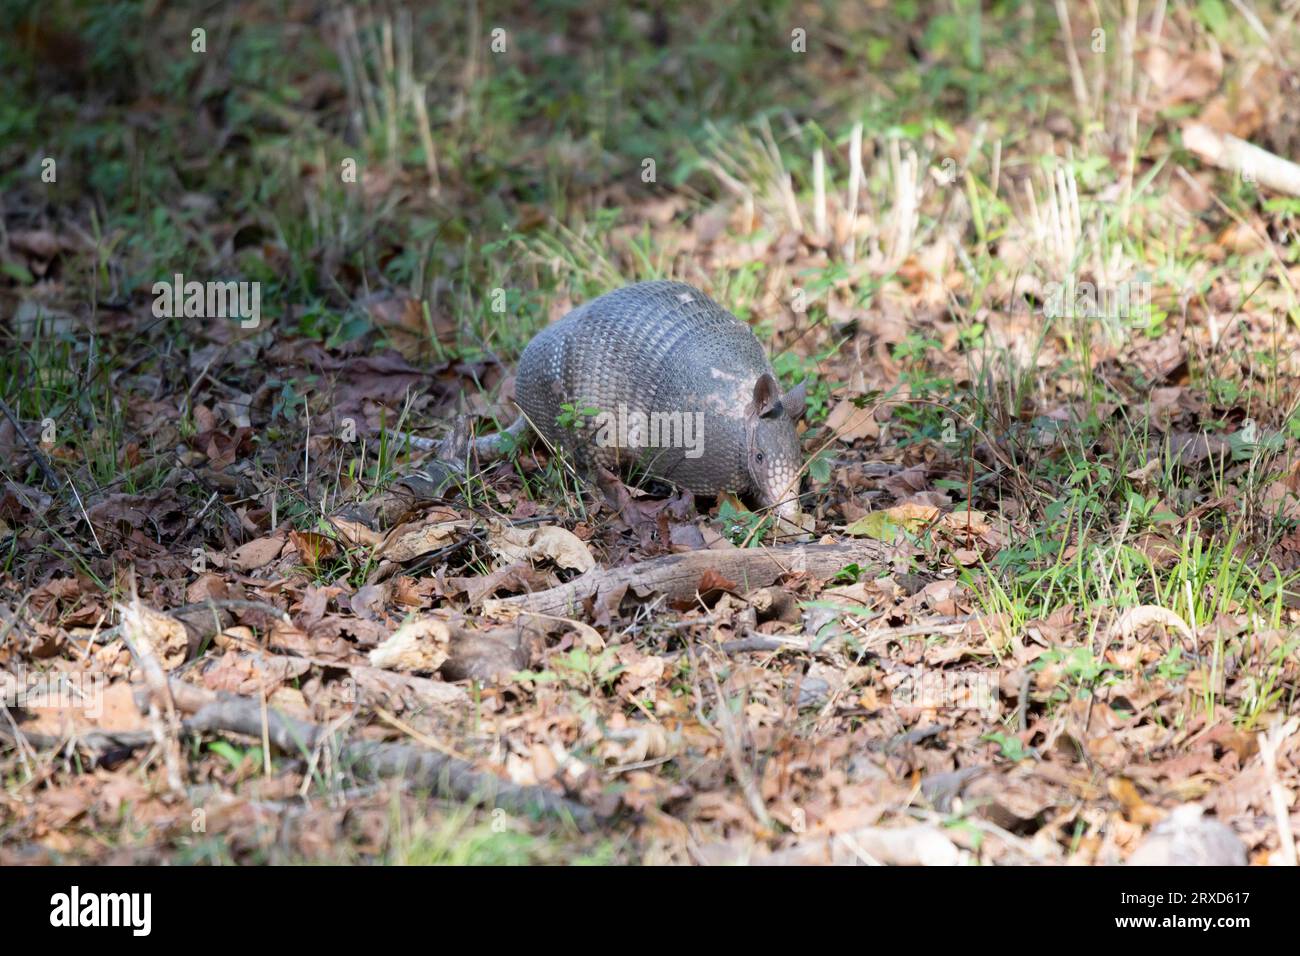 Nine-banded armadillo (Dasypus novemcinctus) with a damaged shell foraging in leaf litter Stock Photo